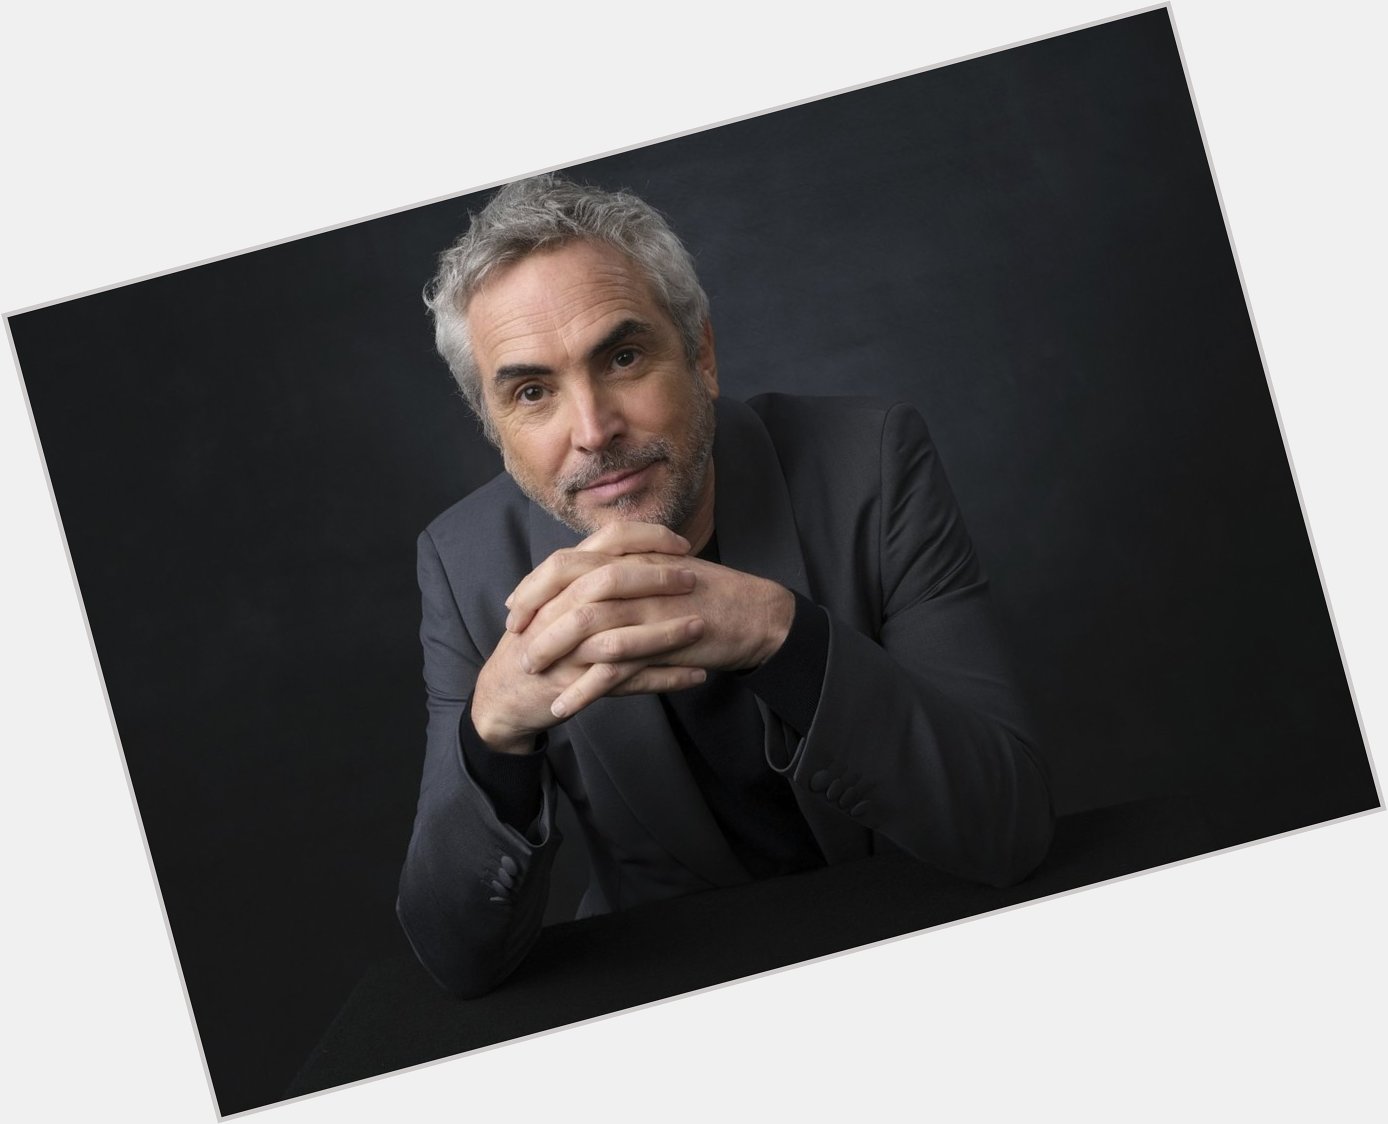 Happy 60th Birthday to Alfonso Cuarón, director of the visual masterpiece Harry Potter and the Prisoner of Azkaban! 